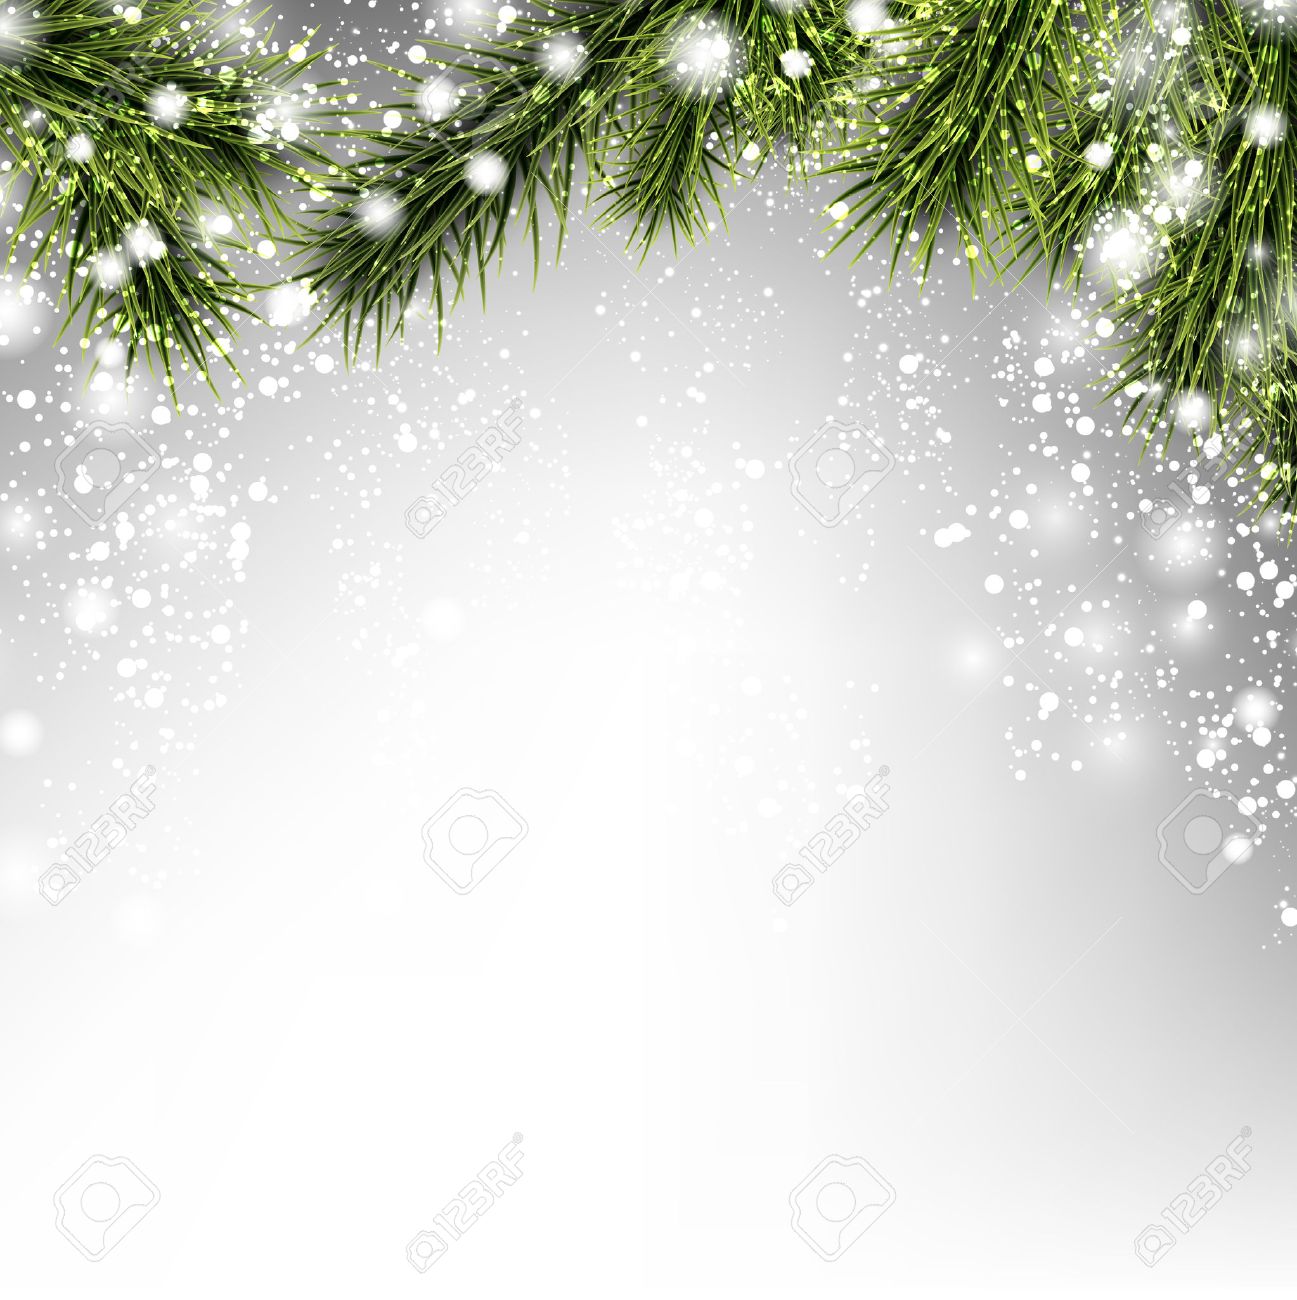 Winter Xmas Background With Fir Branches Royalty Cliparts